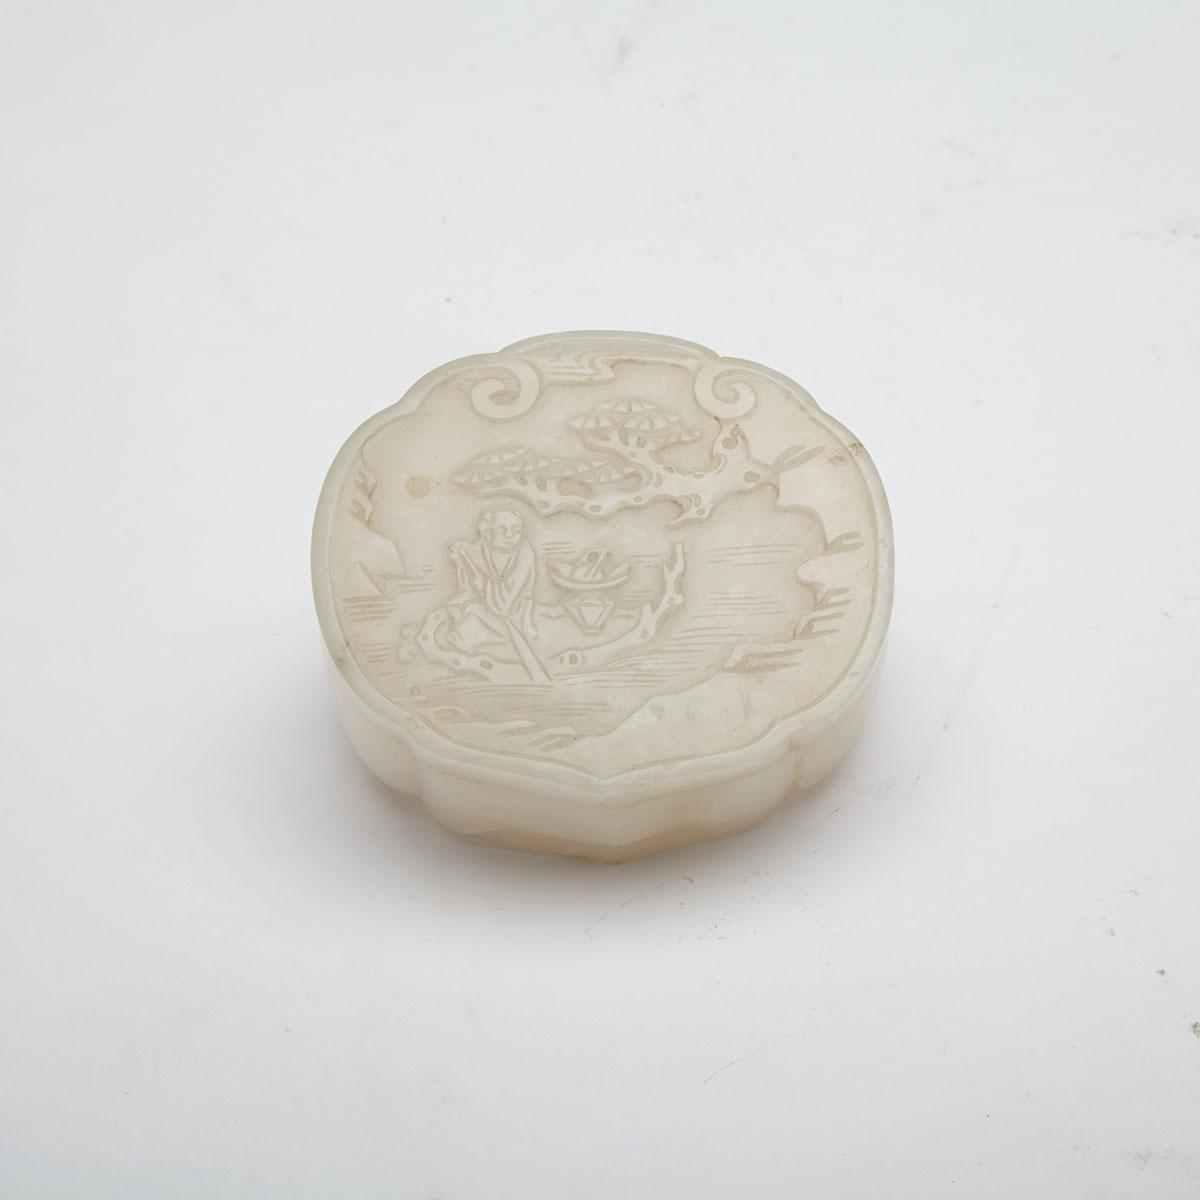 White Jade Box and Cover, Late Qing Dynasty